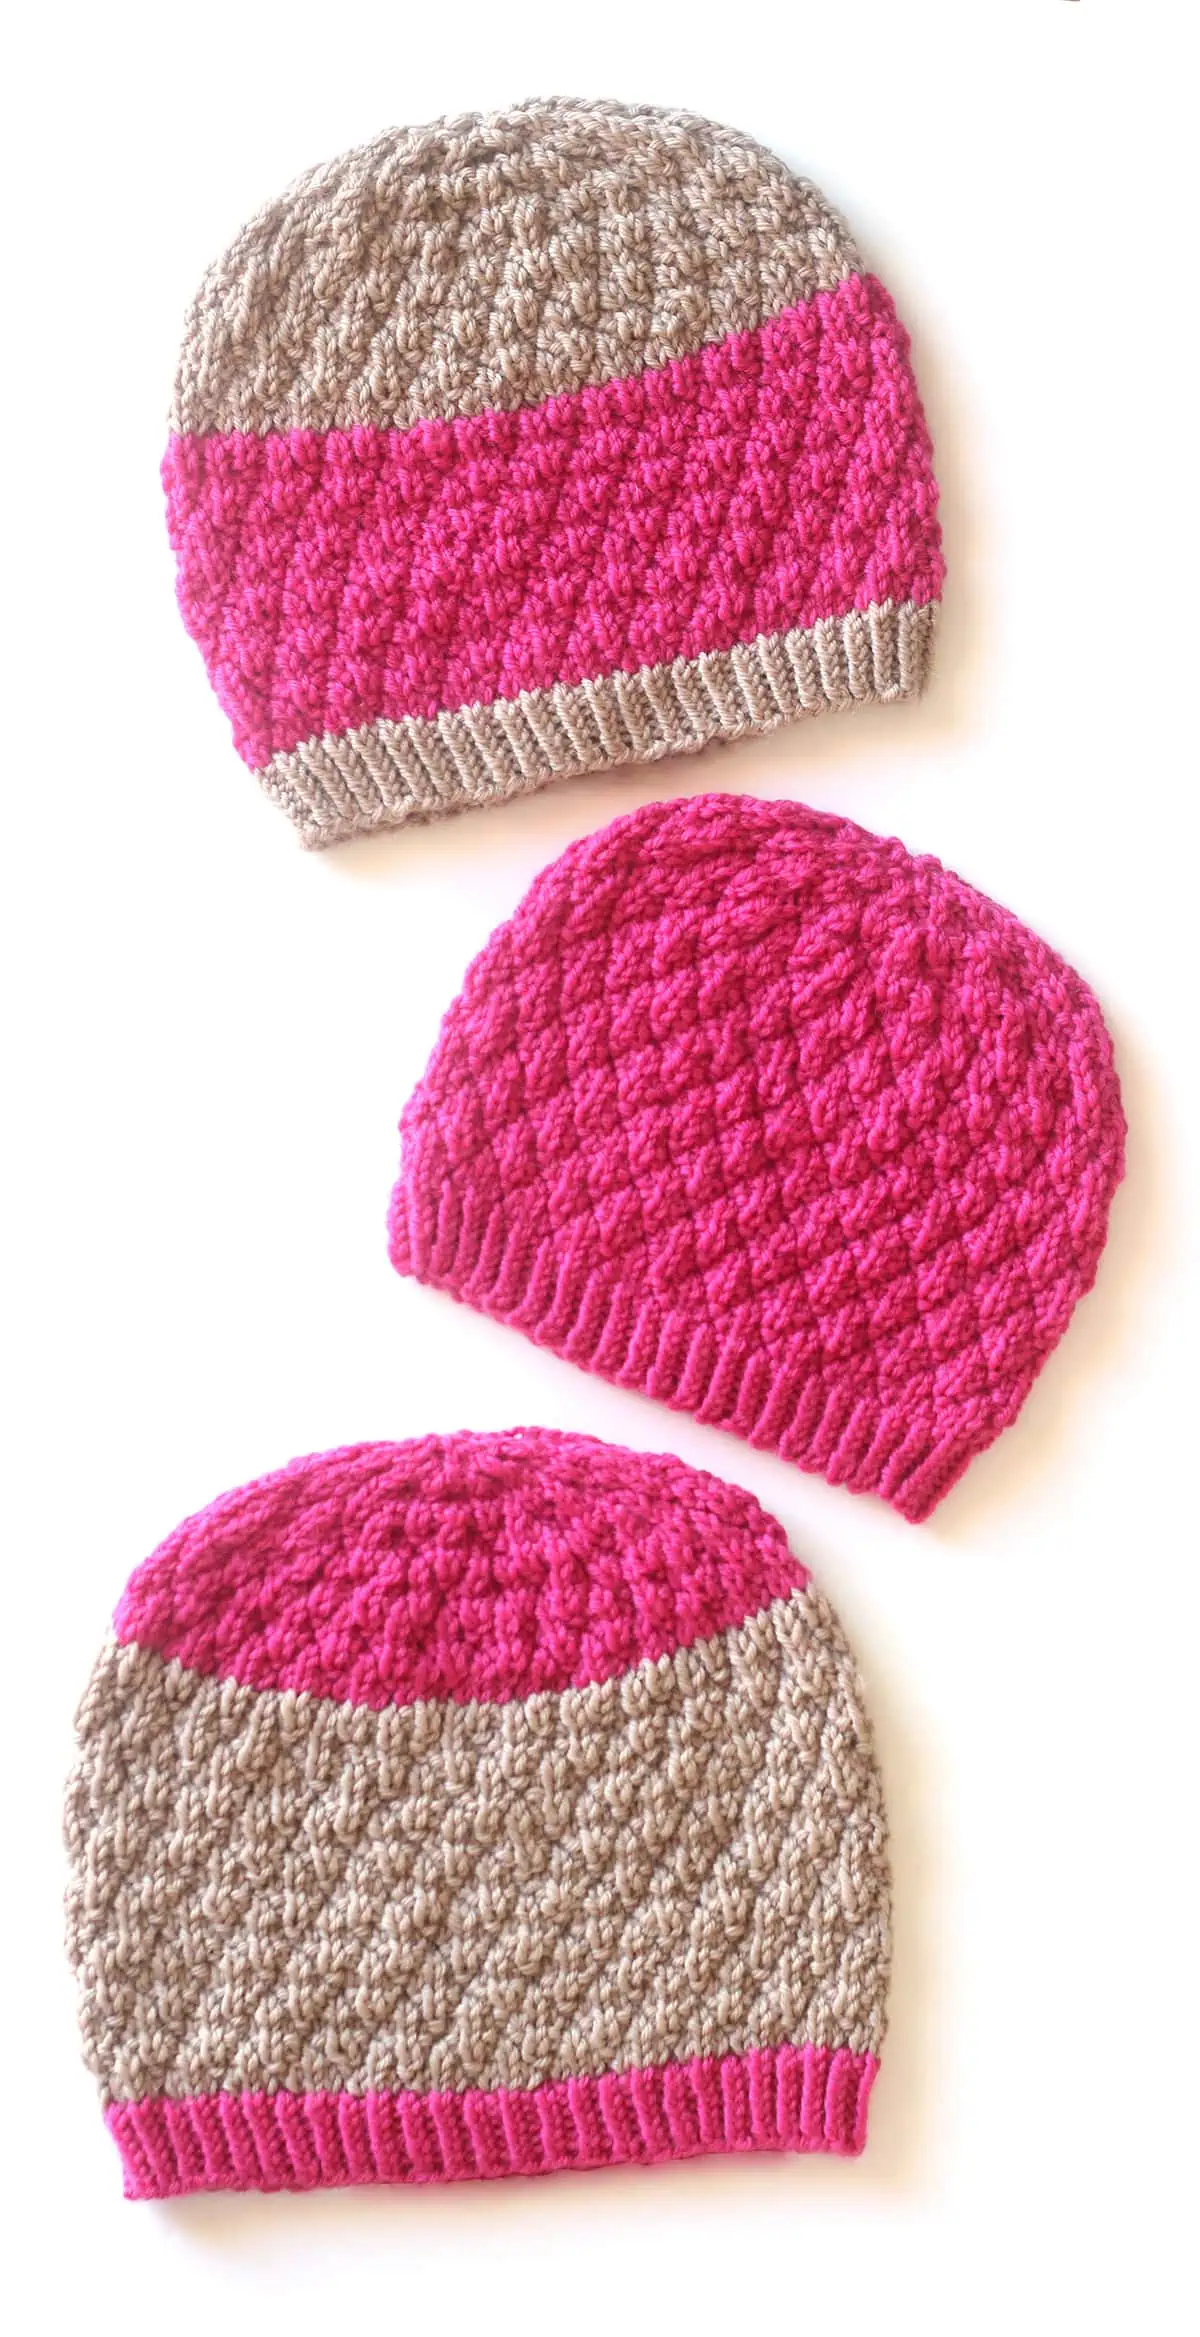 Three Seersucker knitted hats in tan and pink colored yarns.